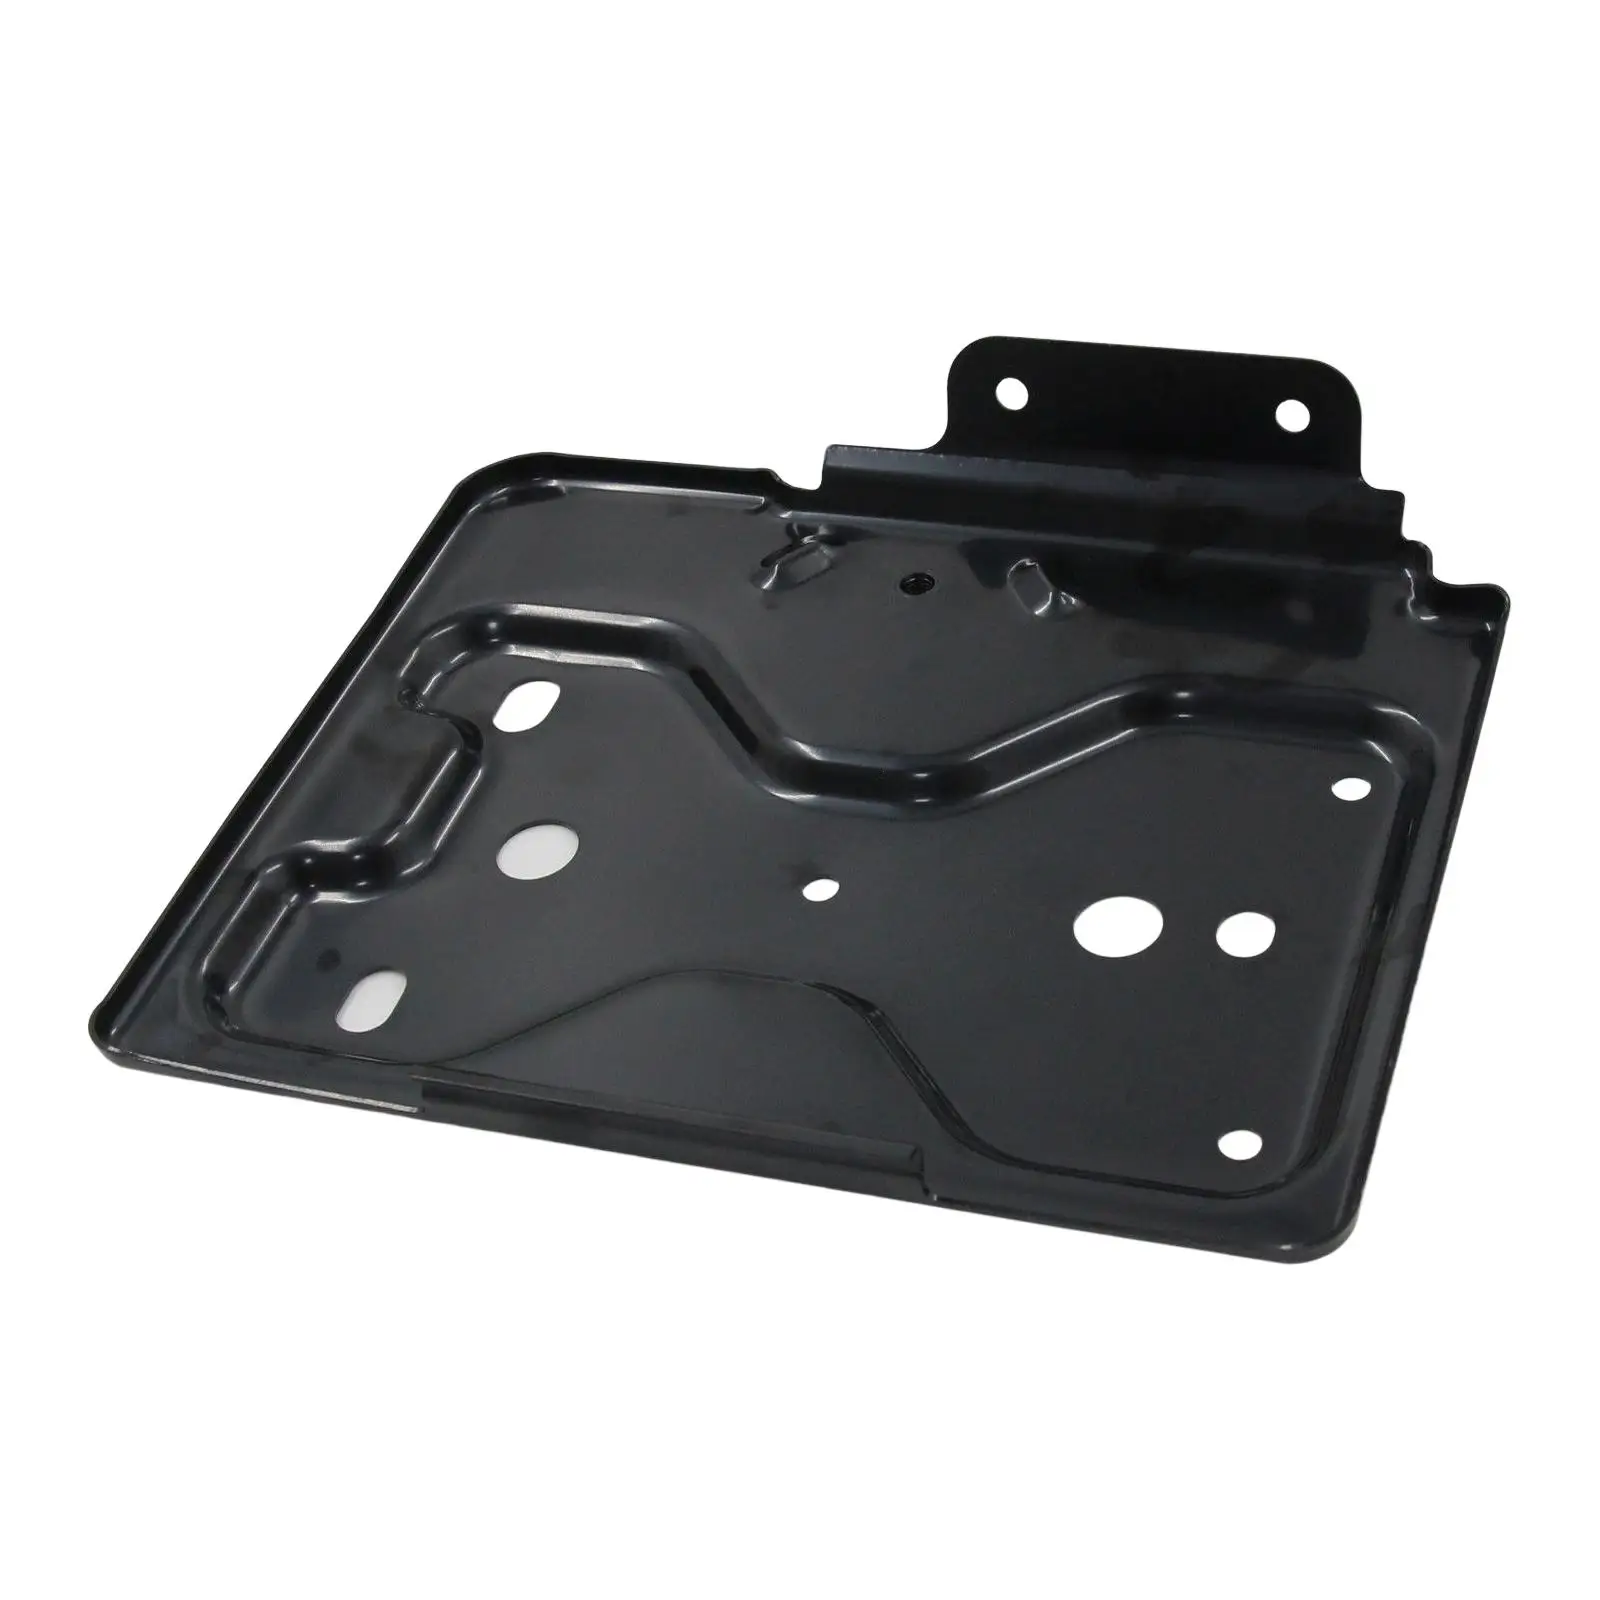 Battery Tray Easy to Install Durable Premium Replaces Spare Parts Car Accessories for Chevrolet Silverado 1500